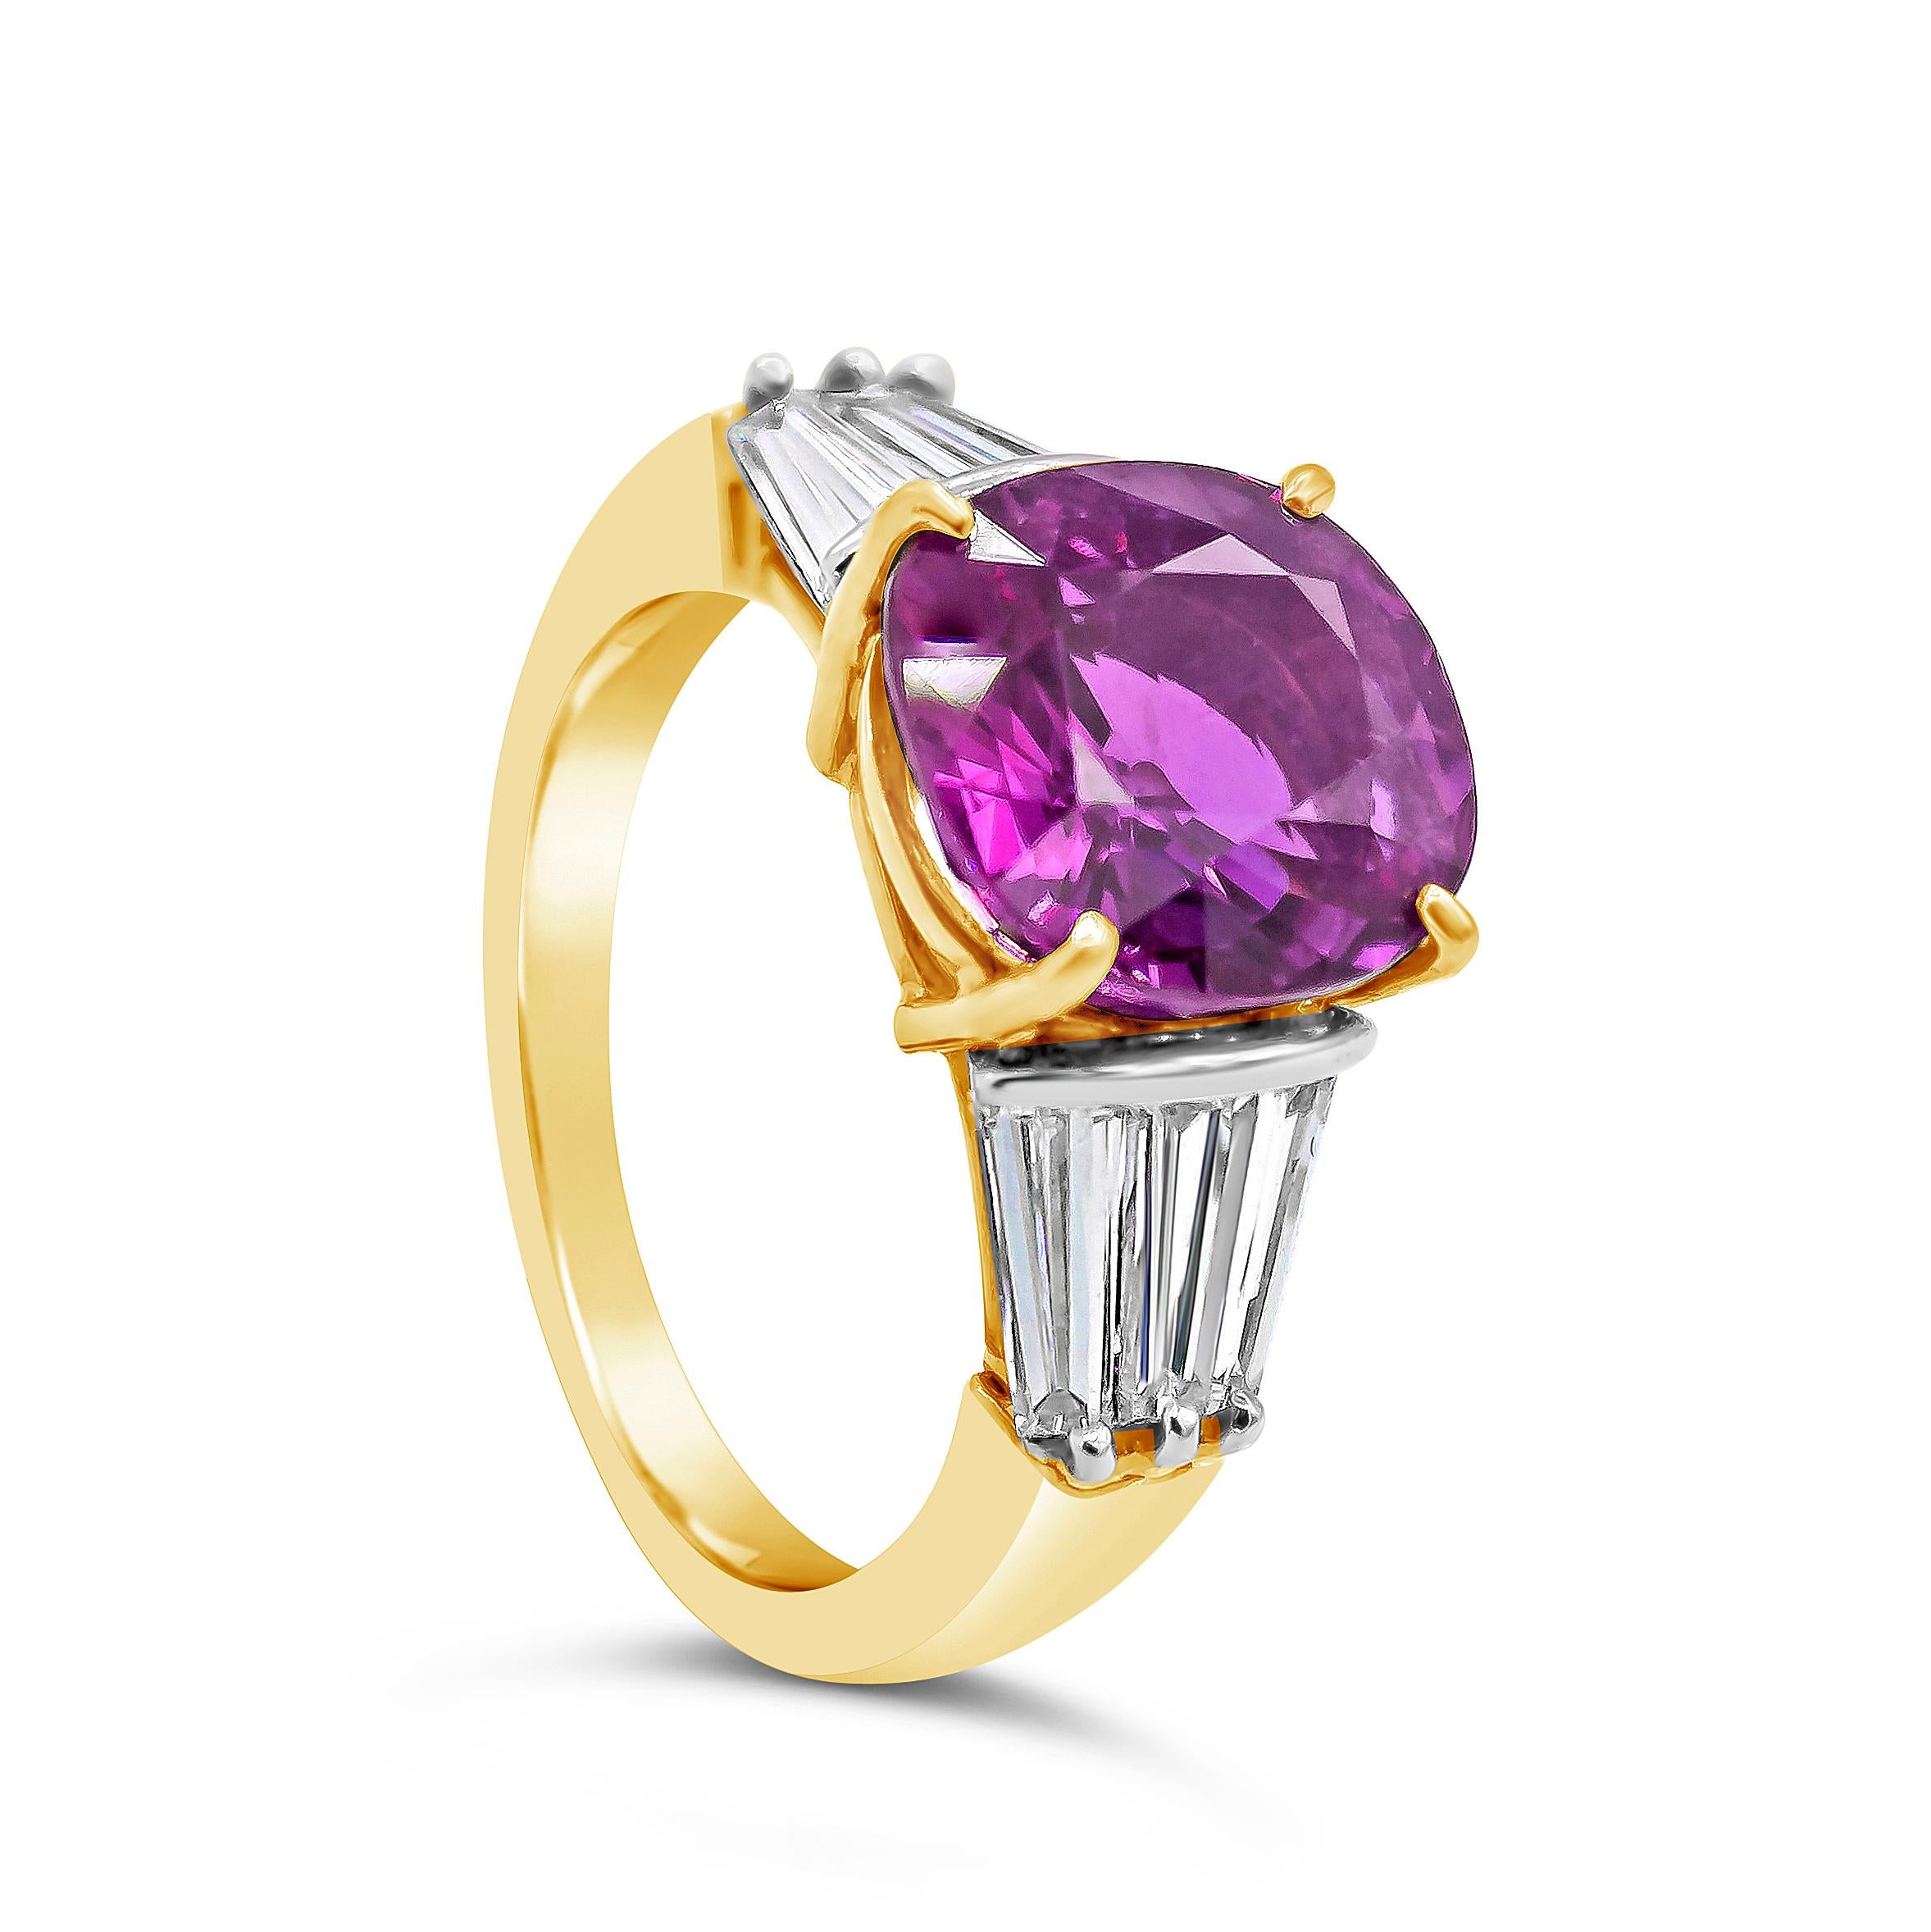 Well crafted three stone engagement ring showcasing a natural color-rich 4.95 carat no heat purple pink sapphire gemstone, VVS in clarity. Set on a four prong 18k yellow gold basket, flanked by three invisibly set tapered baguette diamonds on each